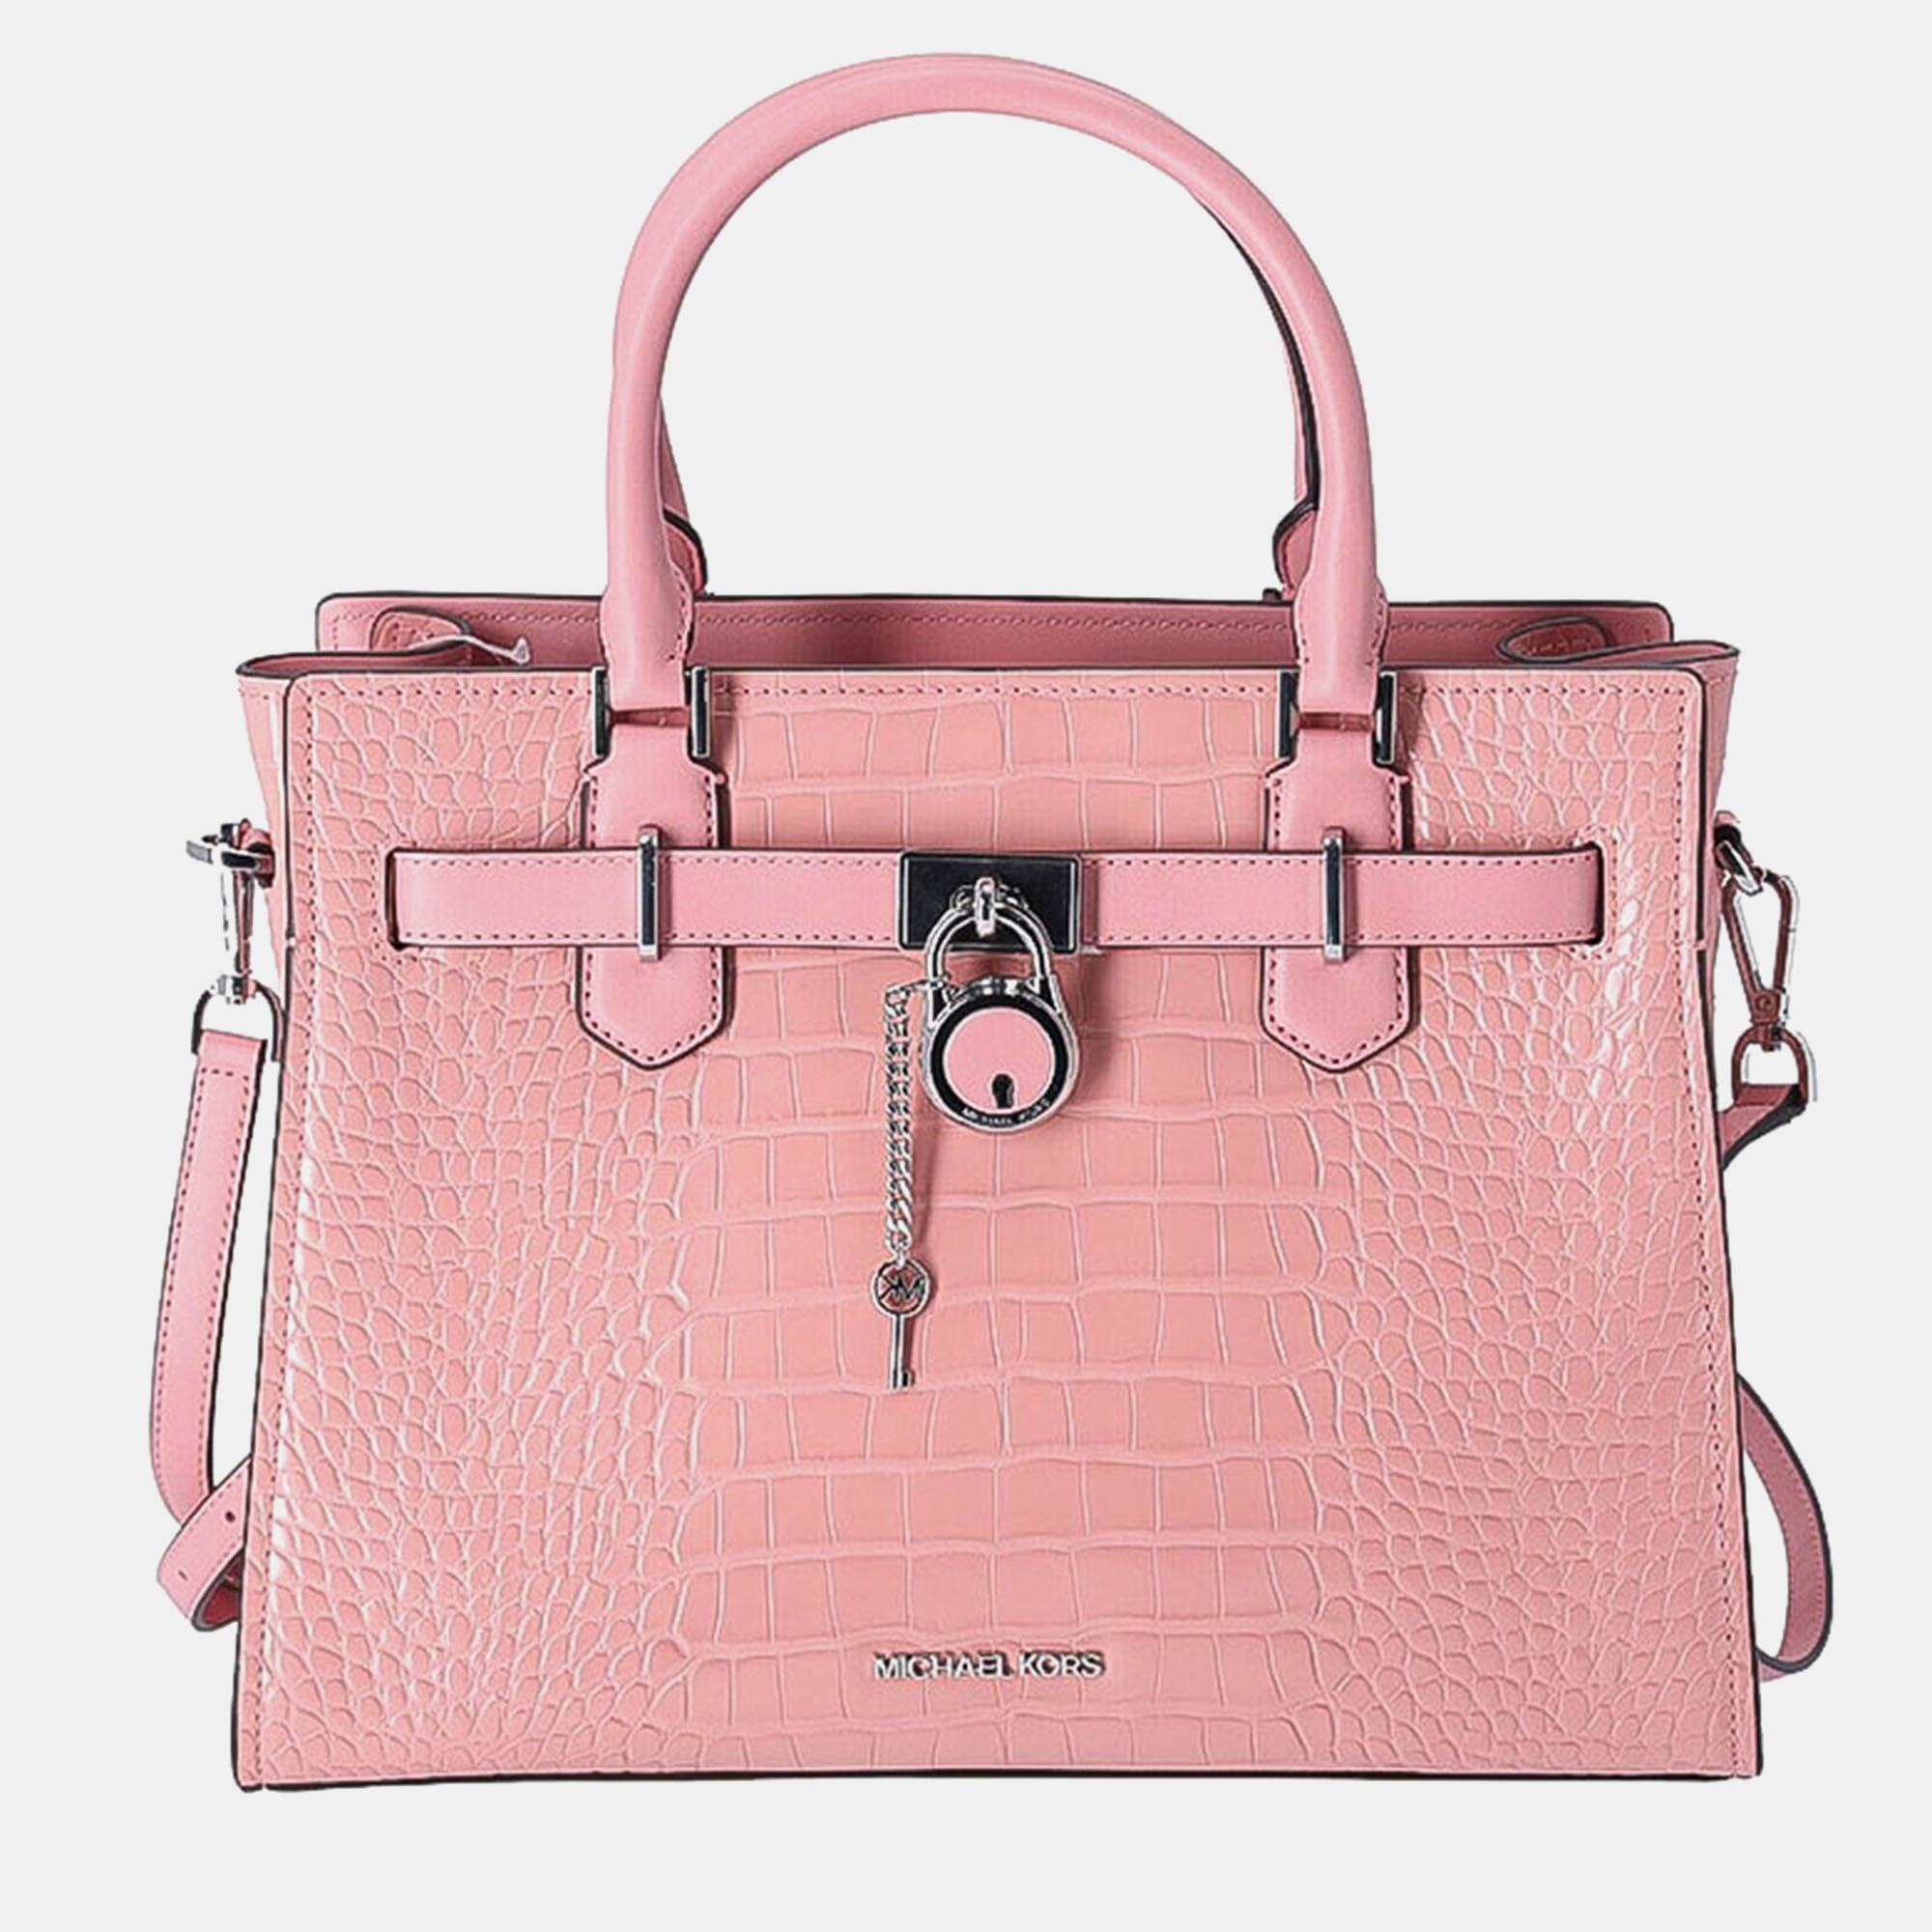 

Michael Kors Textured Leather Tote Bag, Pink